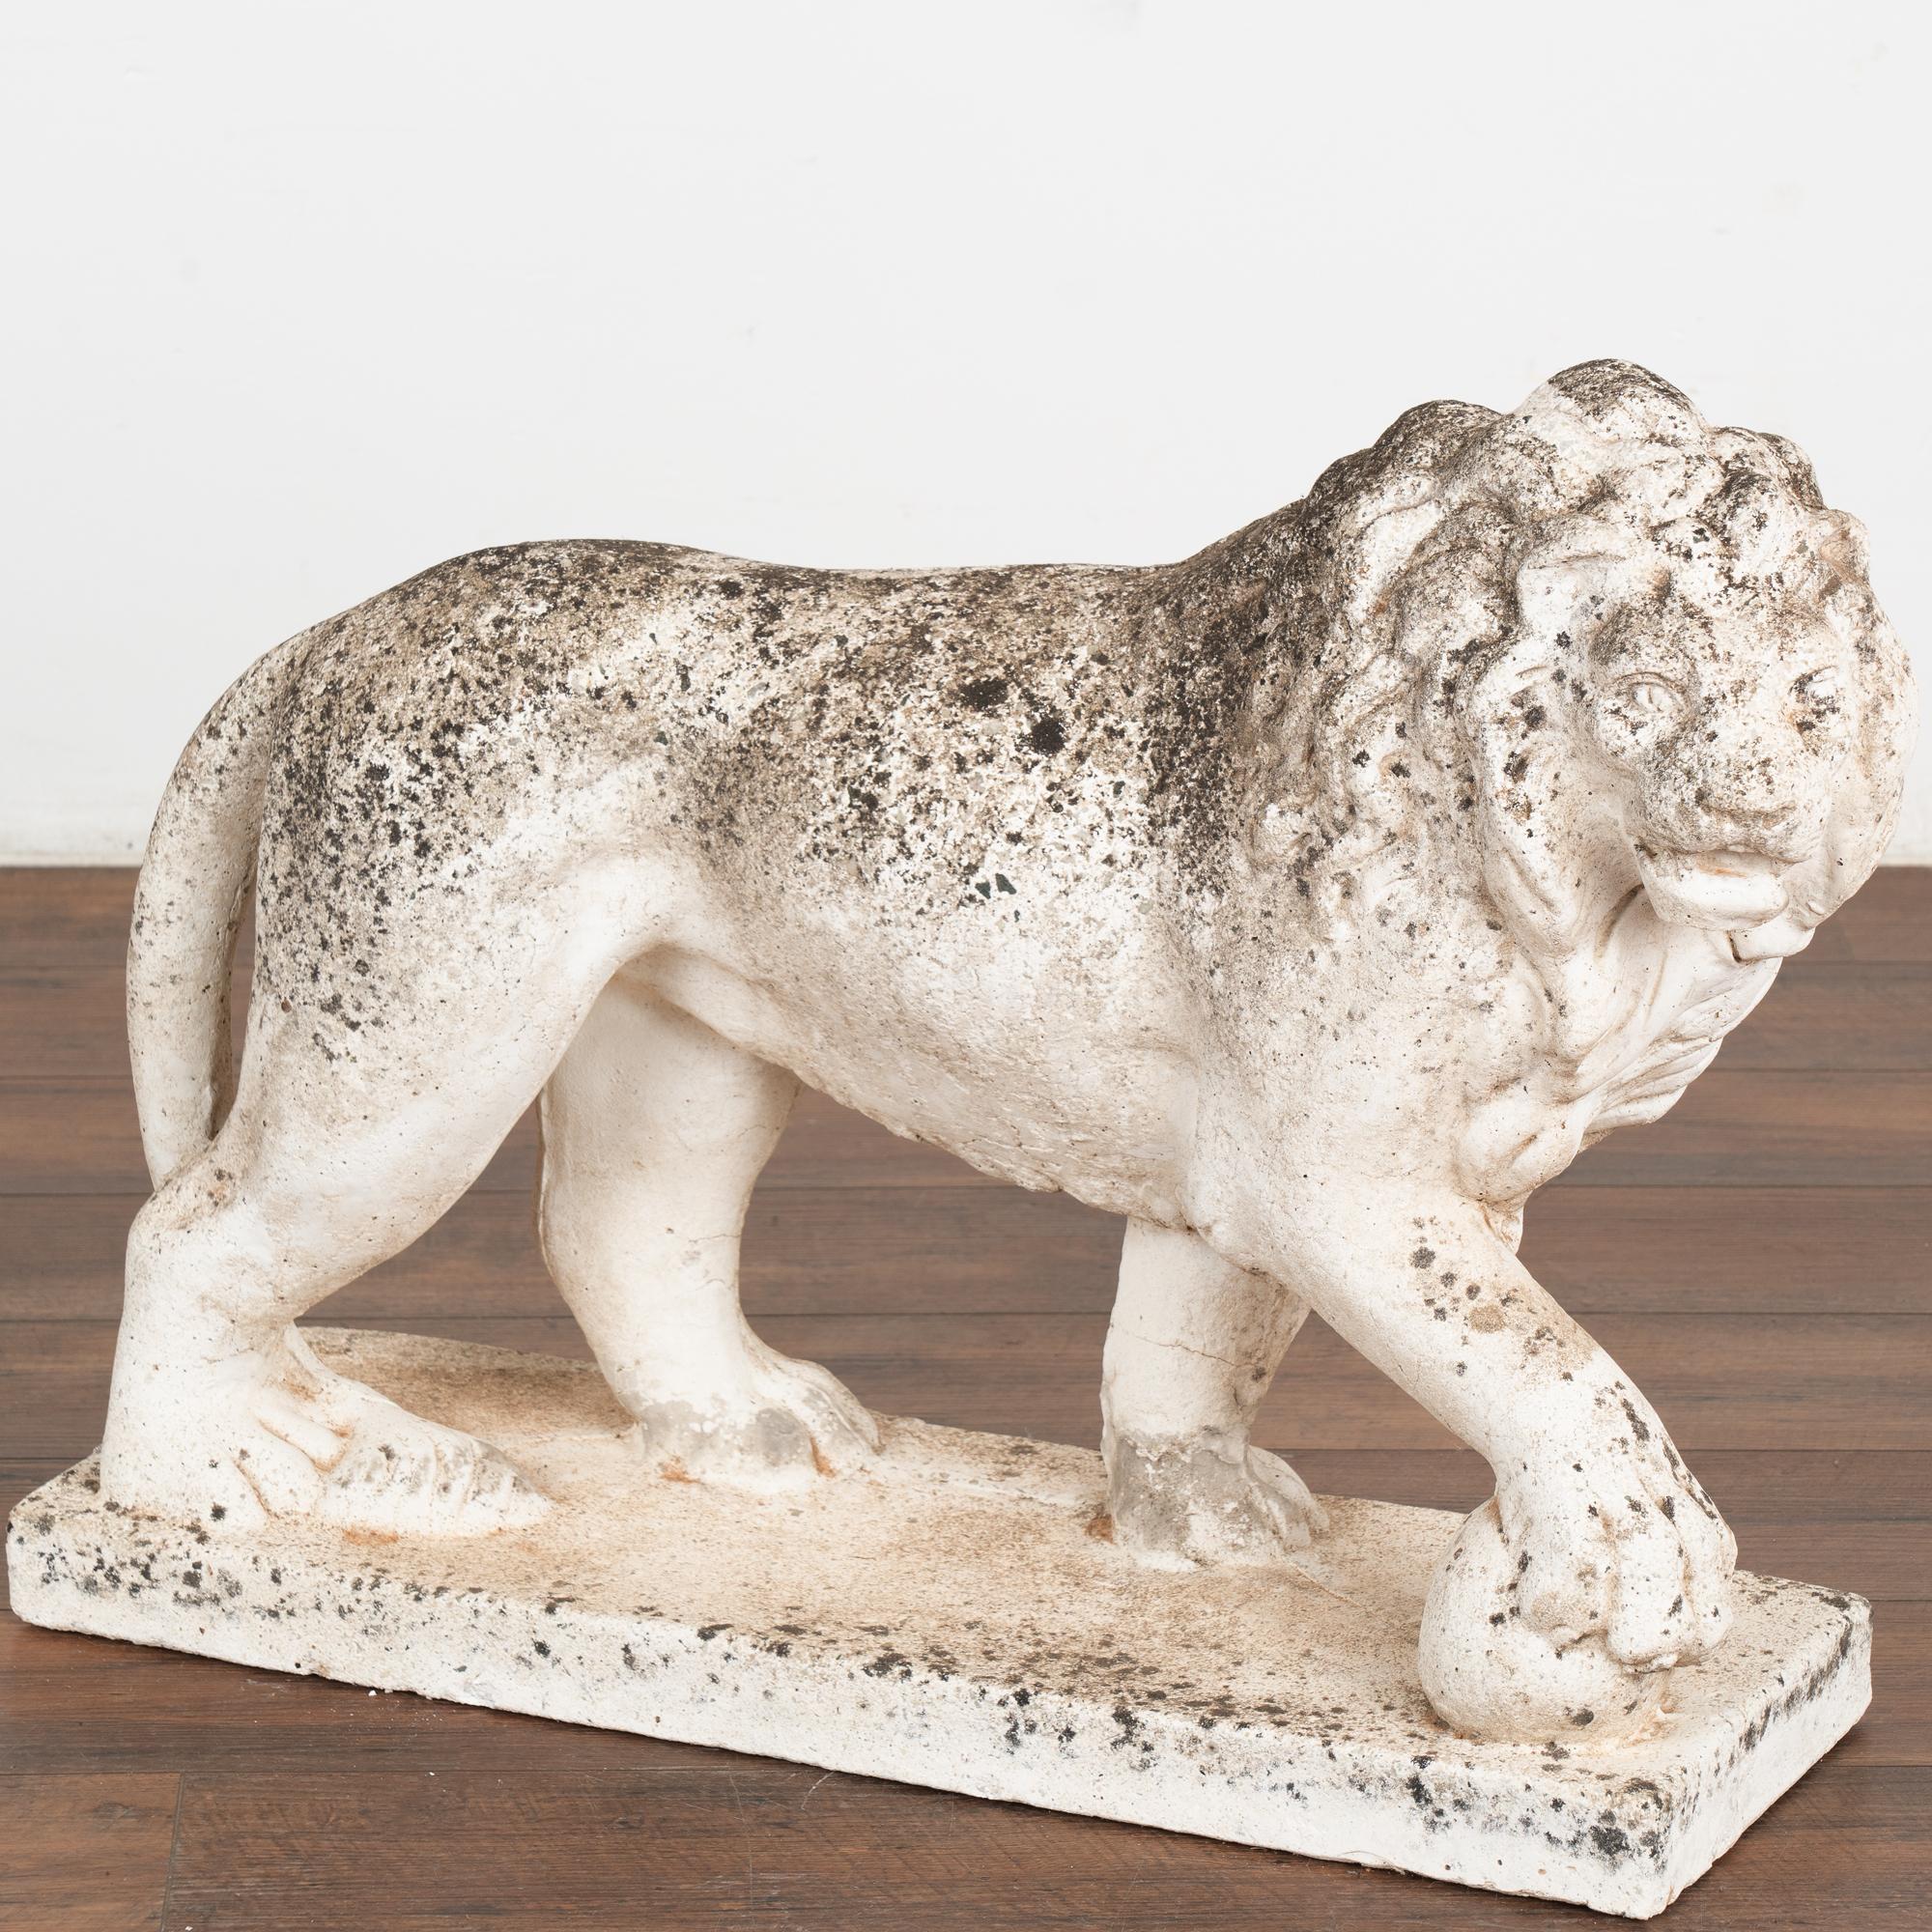 This old limestone lion statute features handsome carved details, including the nicely textured mane and facial features.
The lion is in a walking position, looking to the right and front right paw on ball. The stone has an expected aged patina and